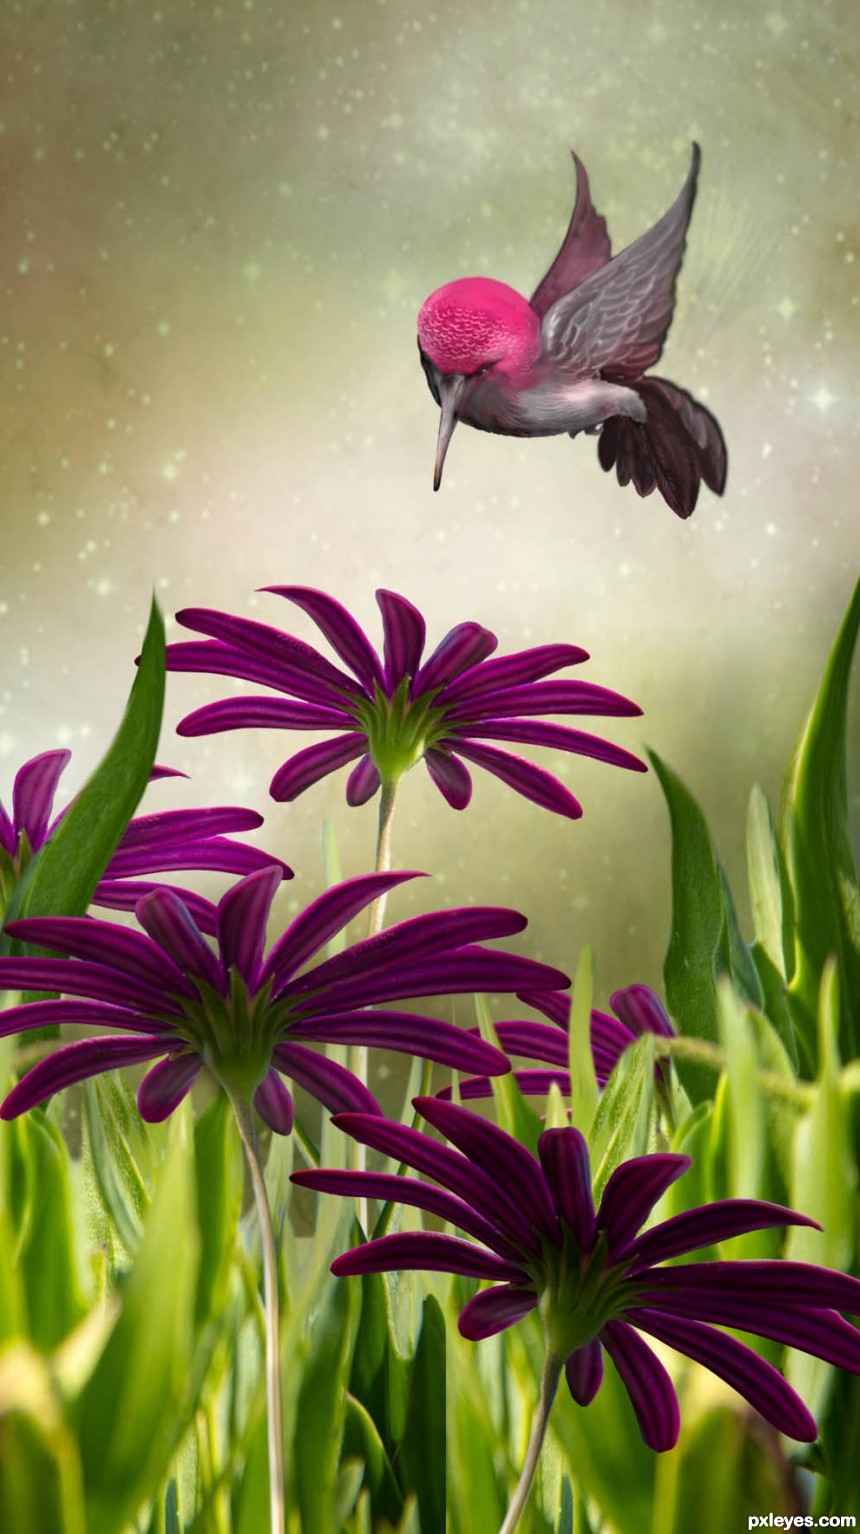 Ready for a Sip of Nectar photoshop picture)